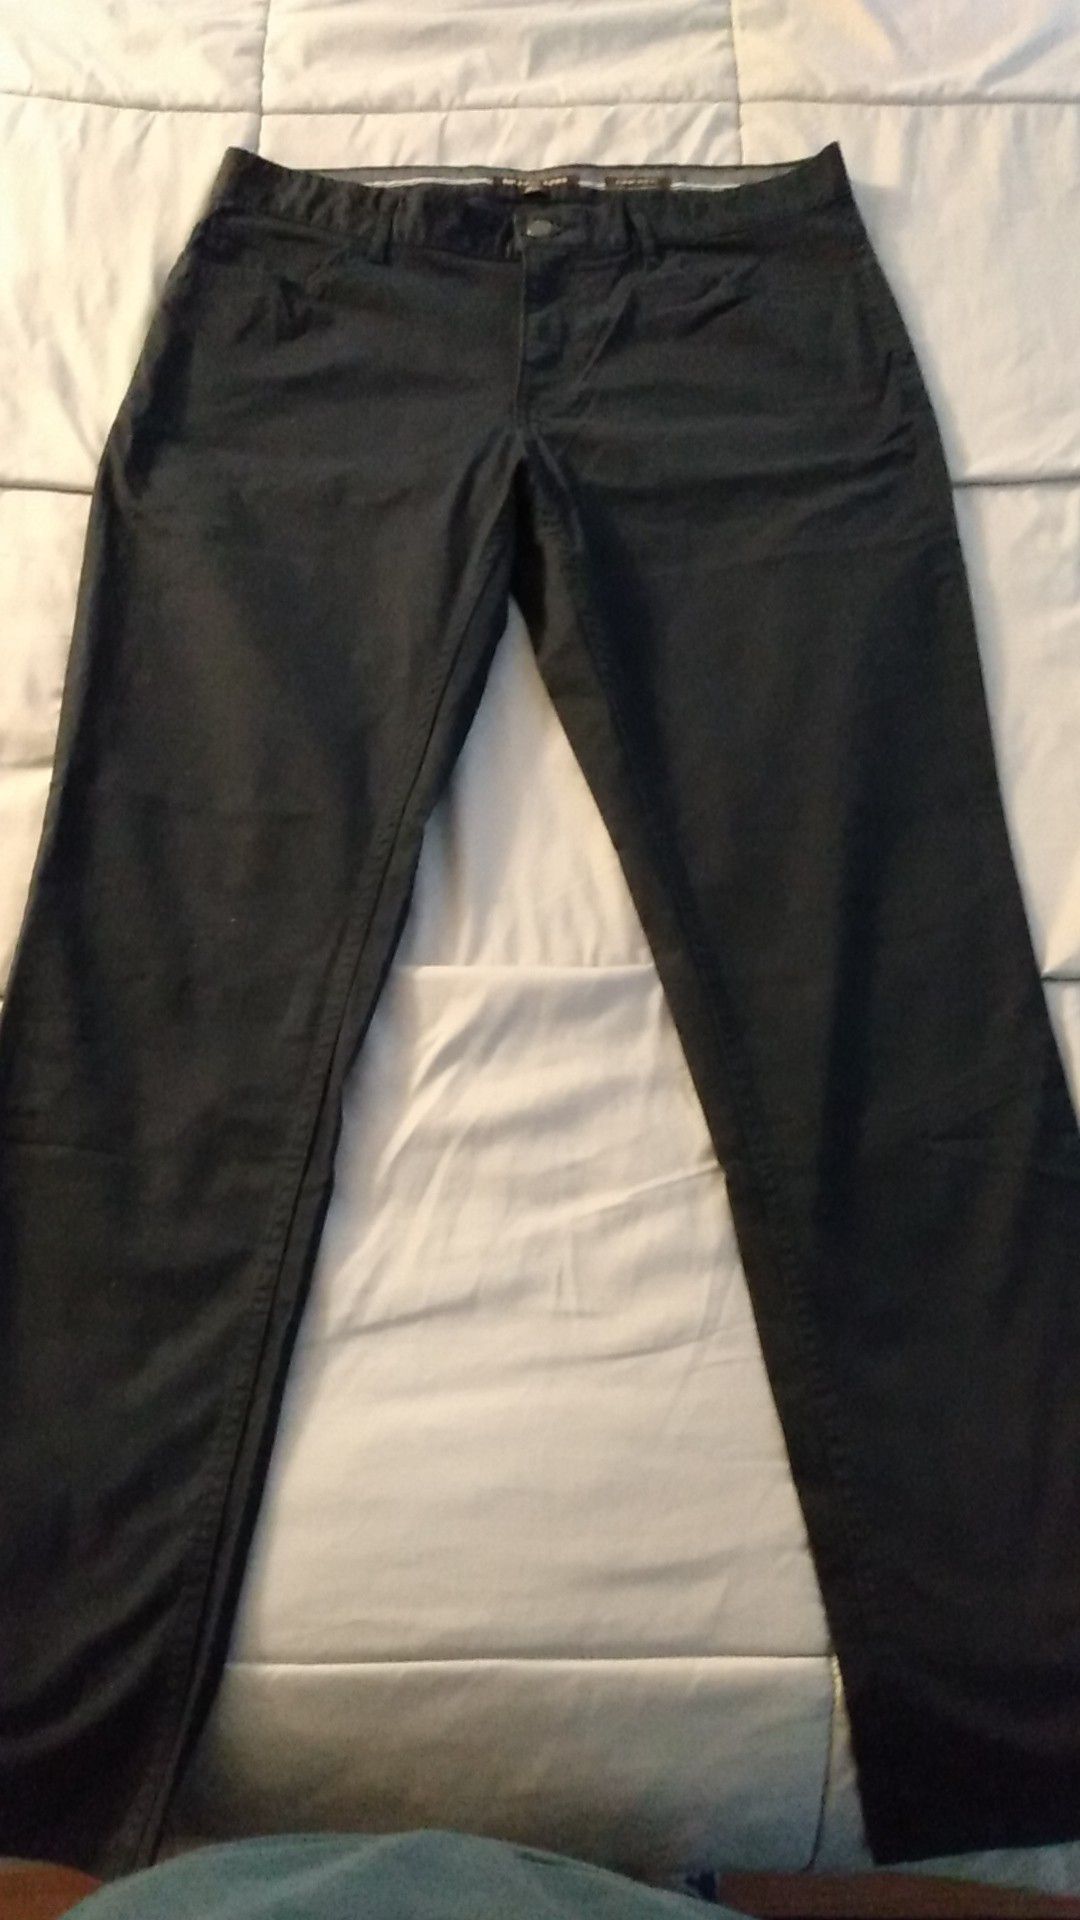 Brand new Michael kors pants Indian navy blue never been worn so never had to wash them once was it my size 32/34 Parker slim fit went for Over$80